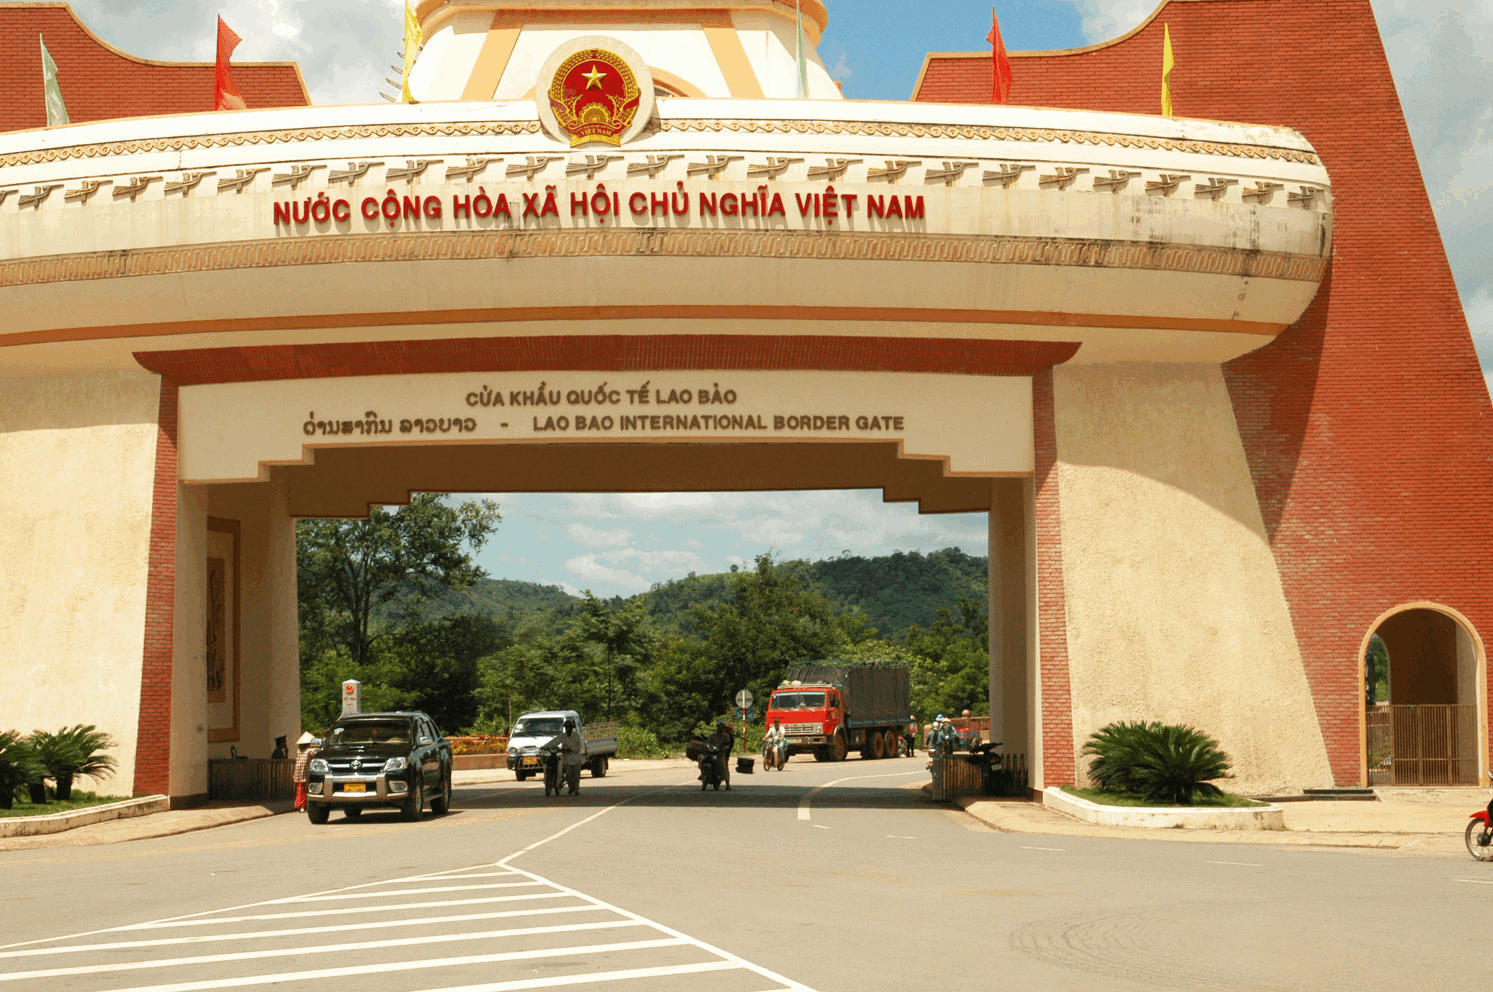 Apply Vietnam E-visa For Crossing The Border From Laos To Vietnam By Bus